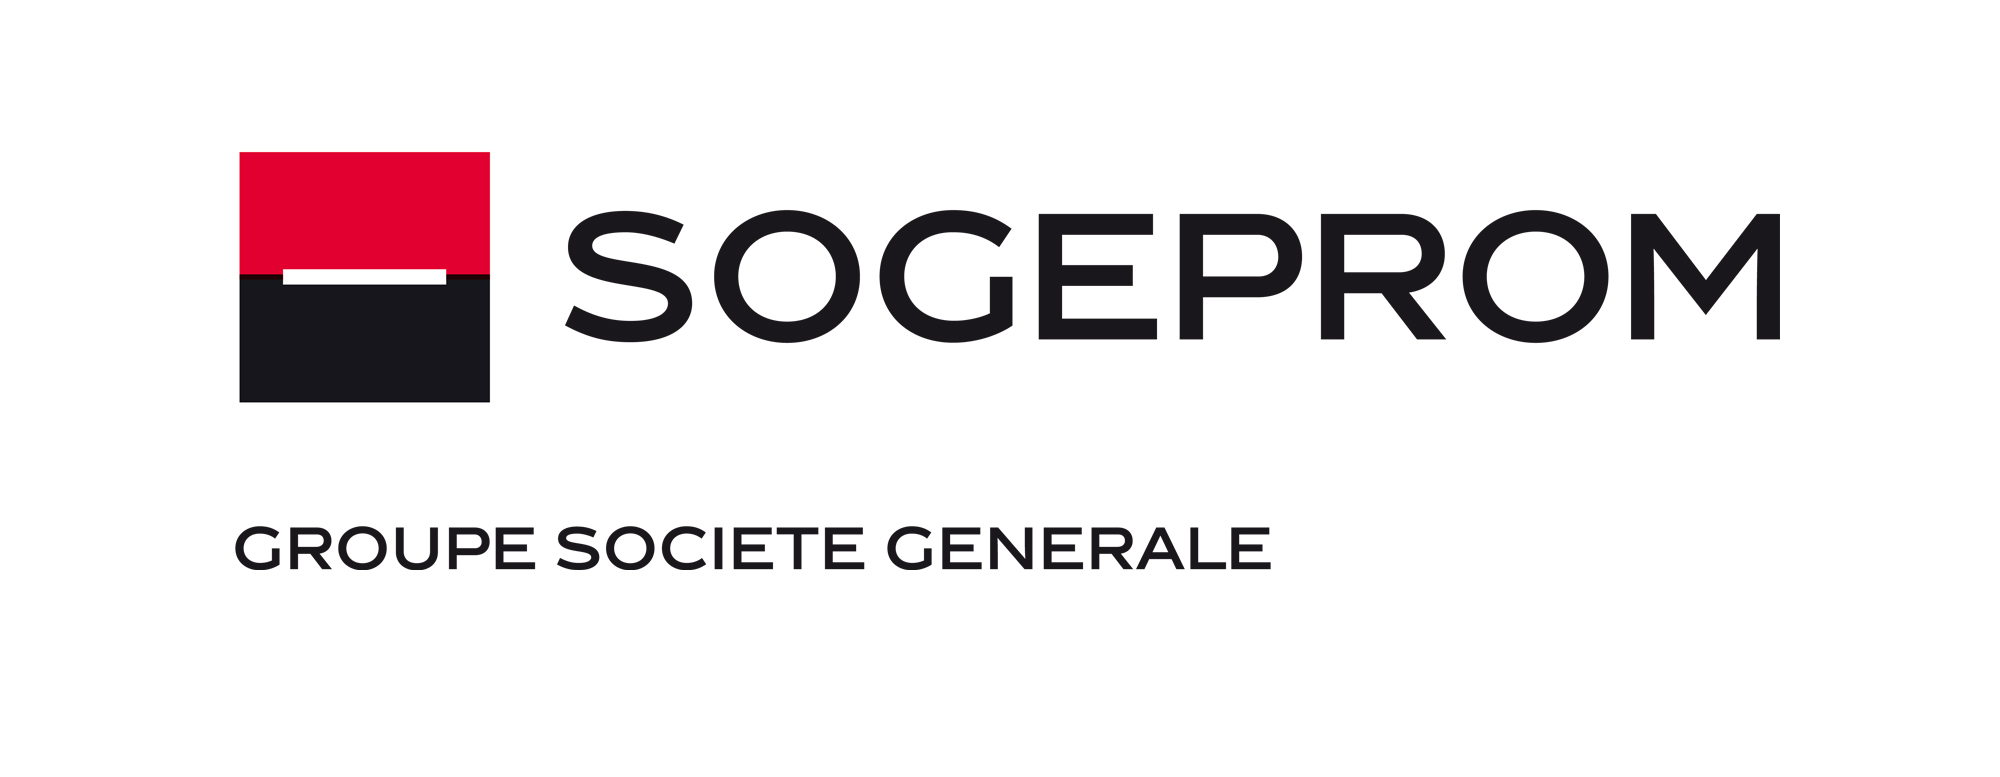 Sogeprom IDF - Promoteur immobilier neuf